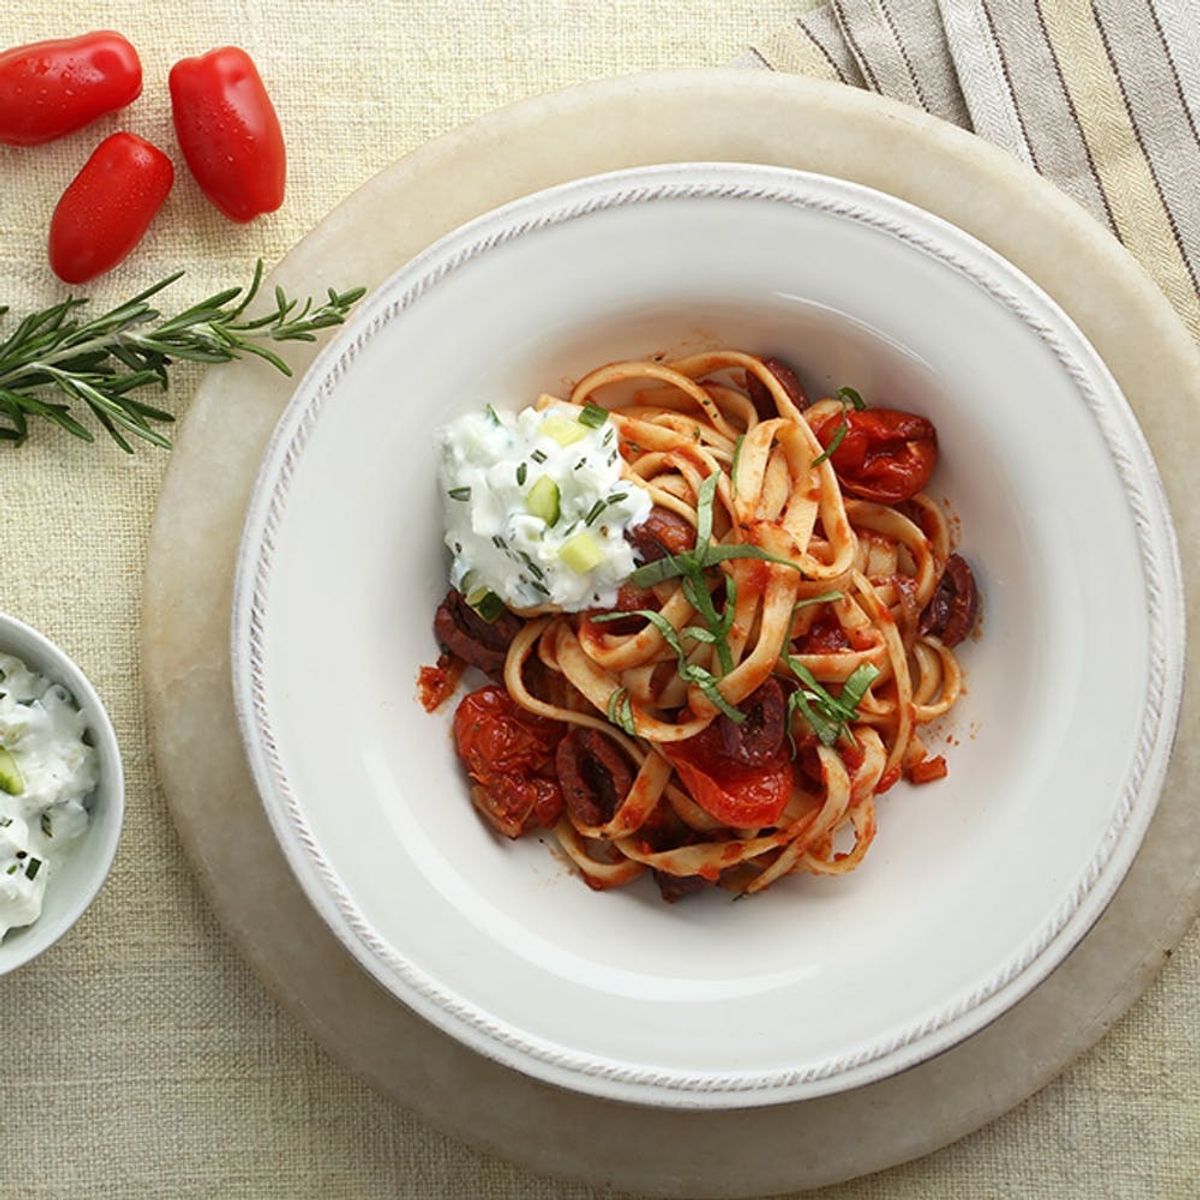 12 Inventive Pasta Recipes to Upgrade Your Weeknight Dinner Routine